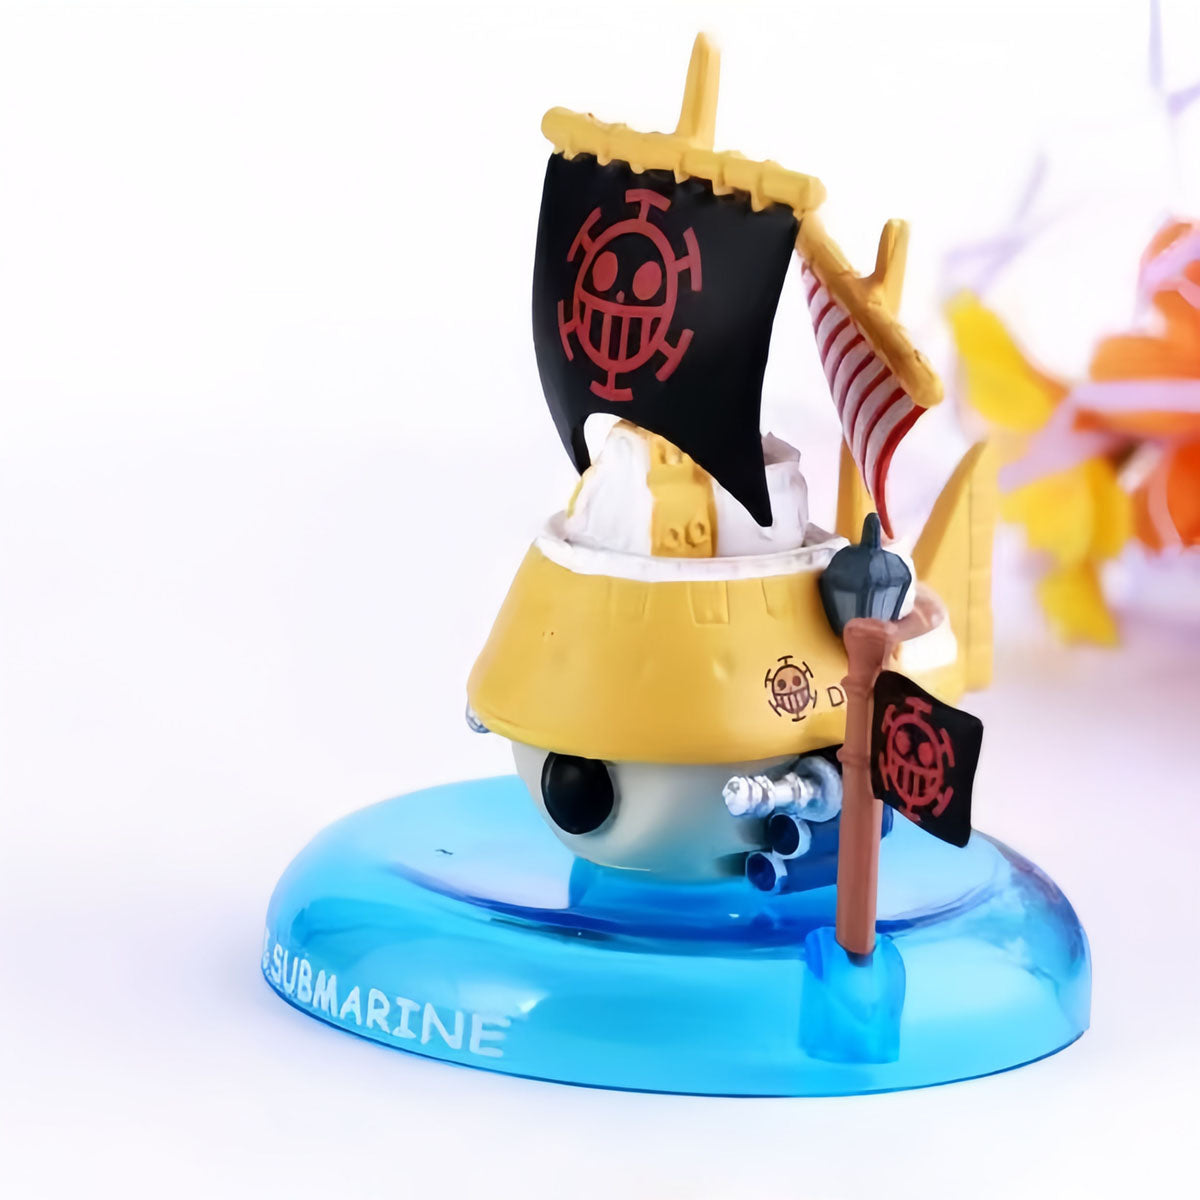 Thousand Sunny/Going Merry Q version Luffy Hand Thief Ship Pirate ship 6 decorative car decoration Sunny Merry model (set of 6)